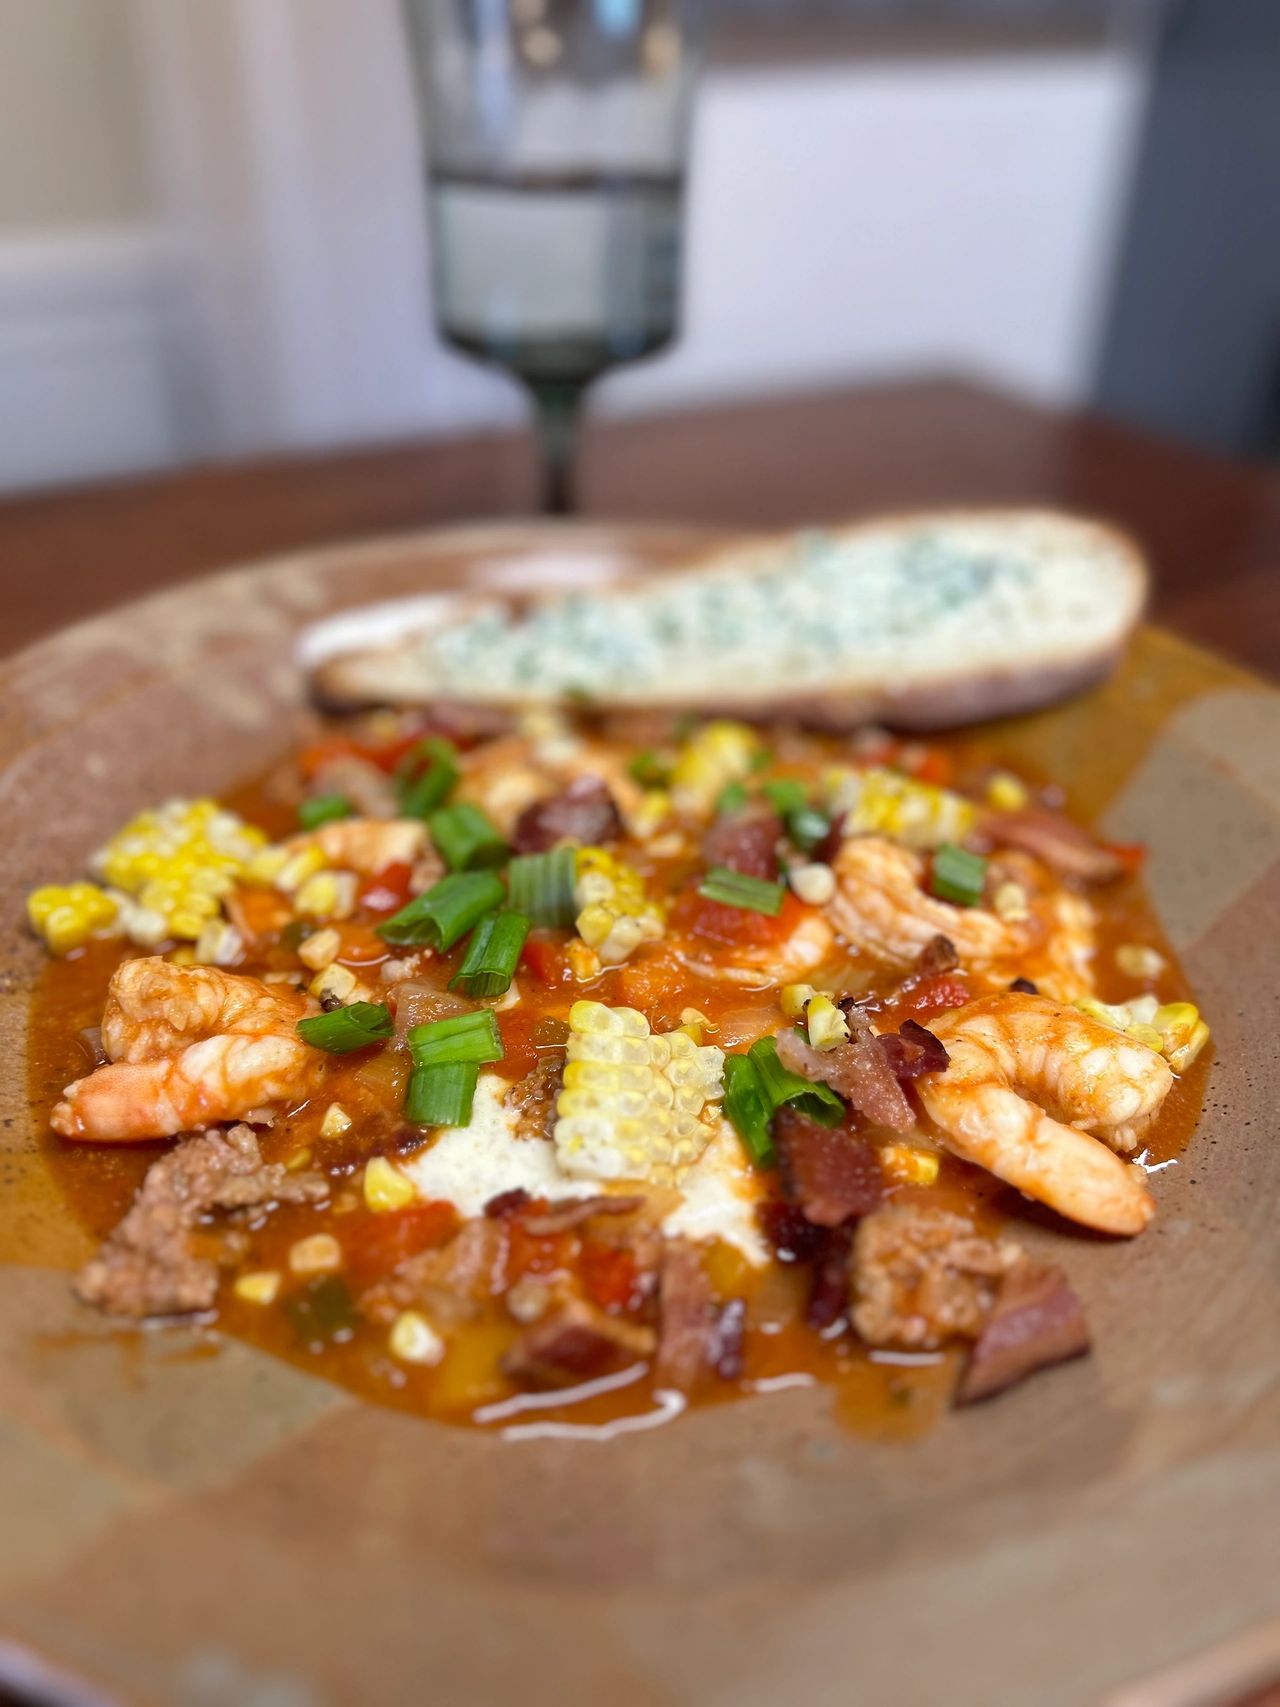 Shrimp and grits in a pottery bowl with bread in the background.